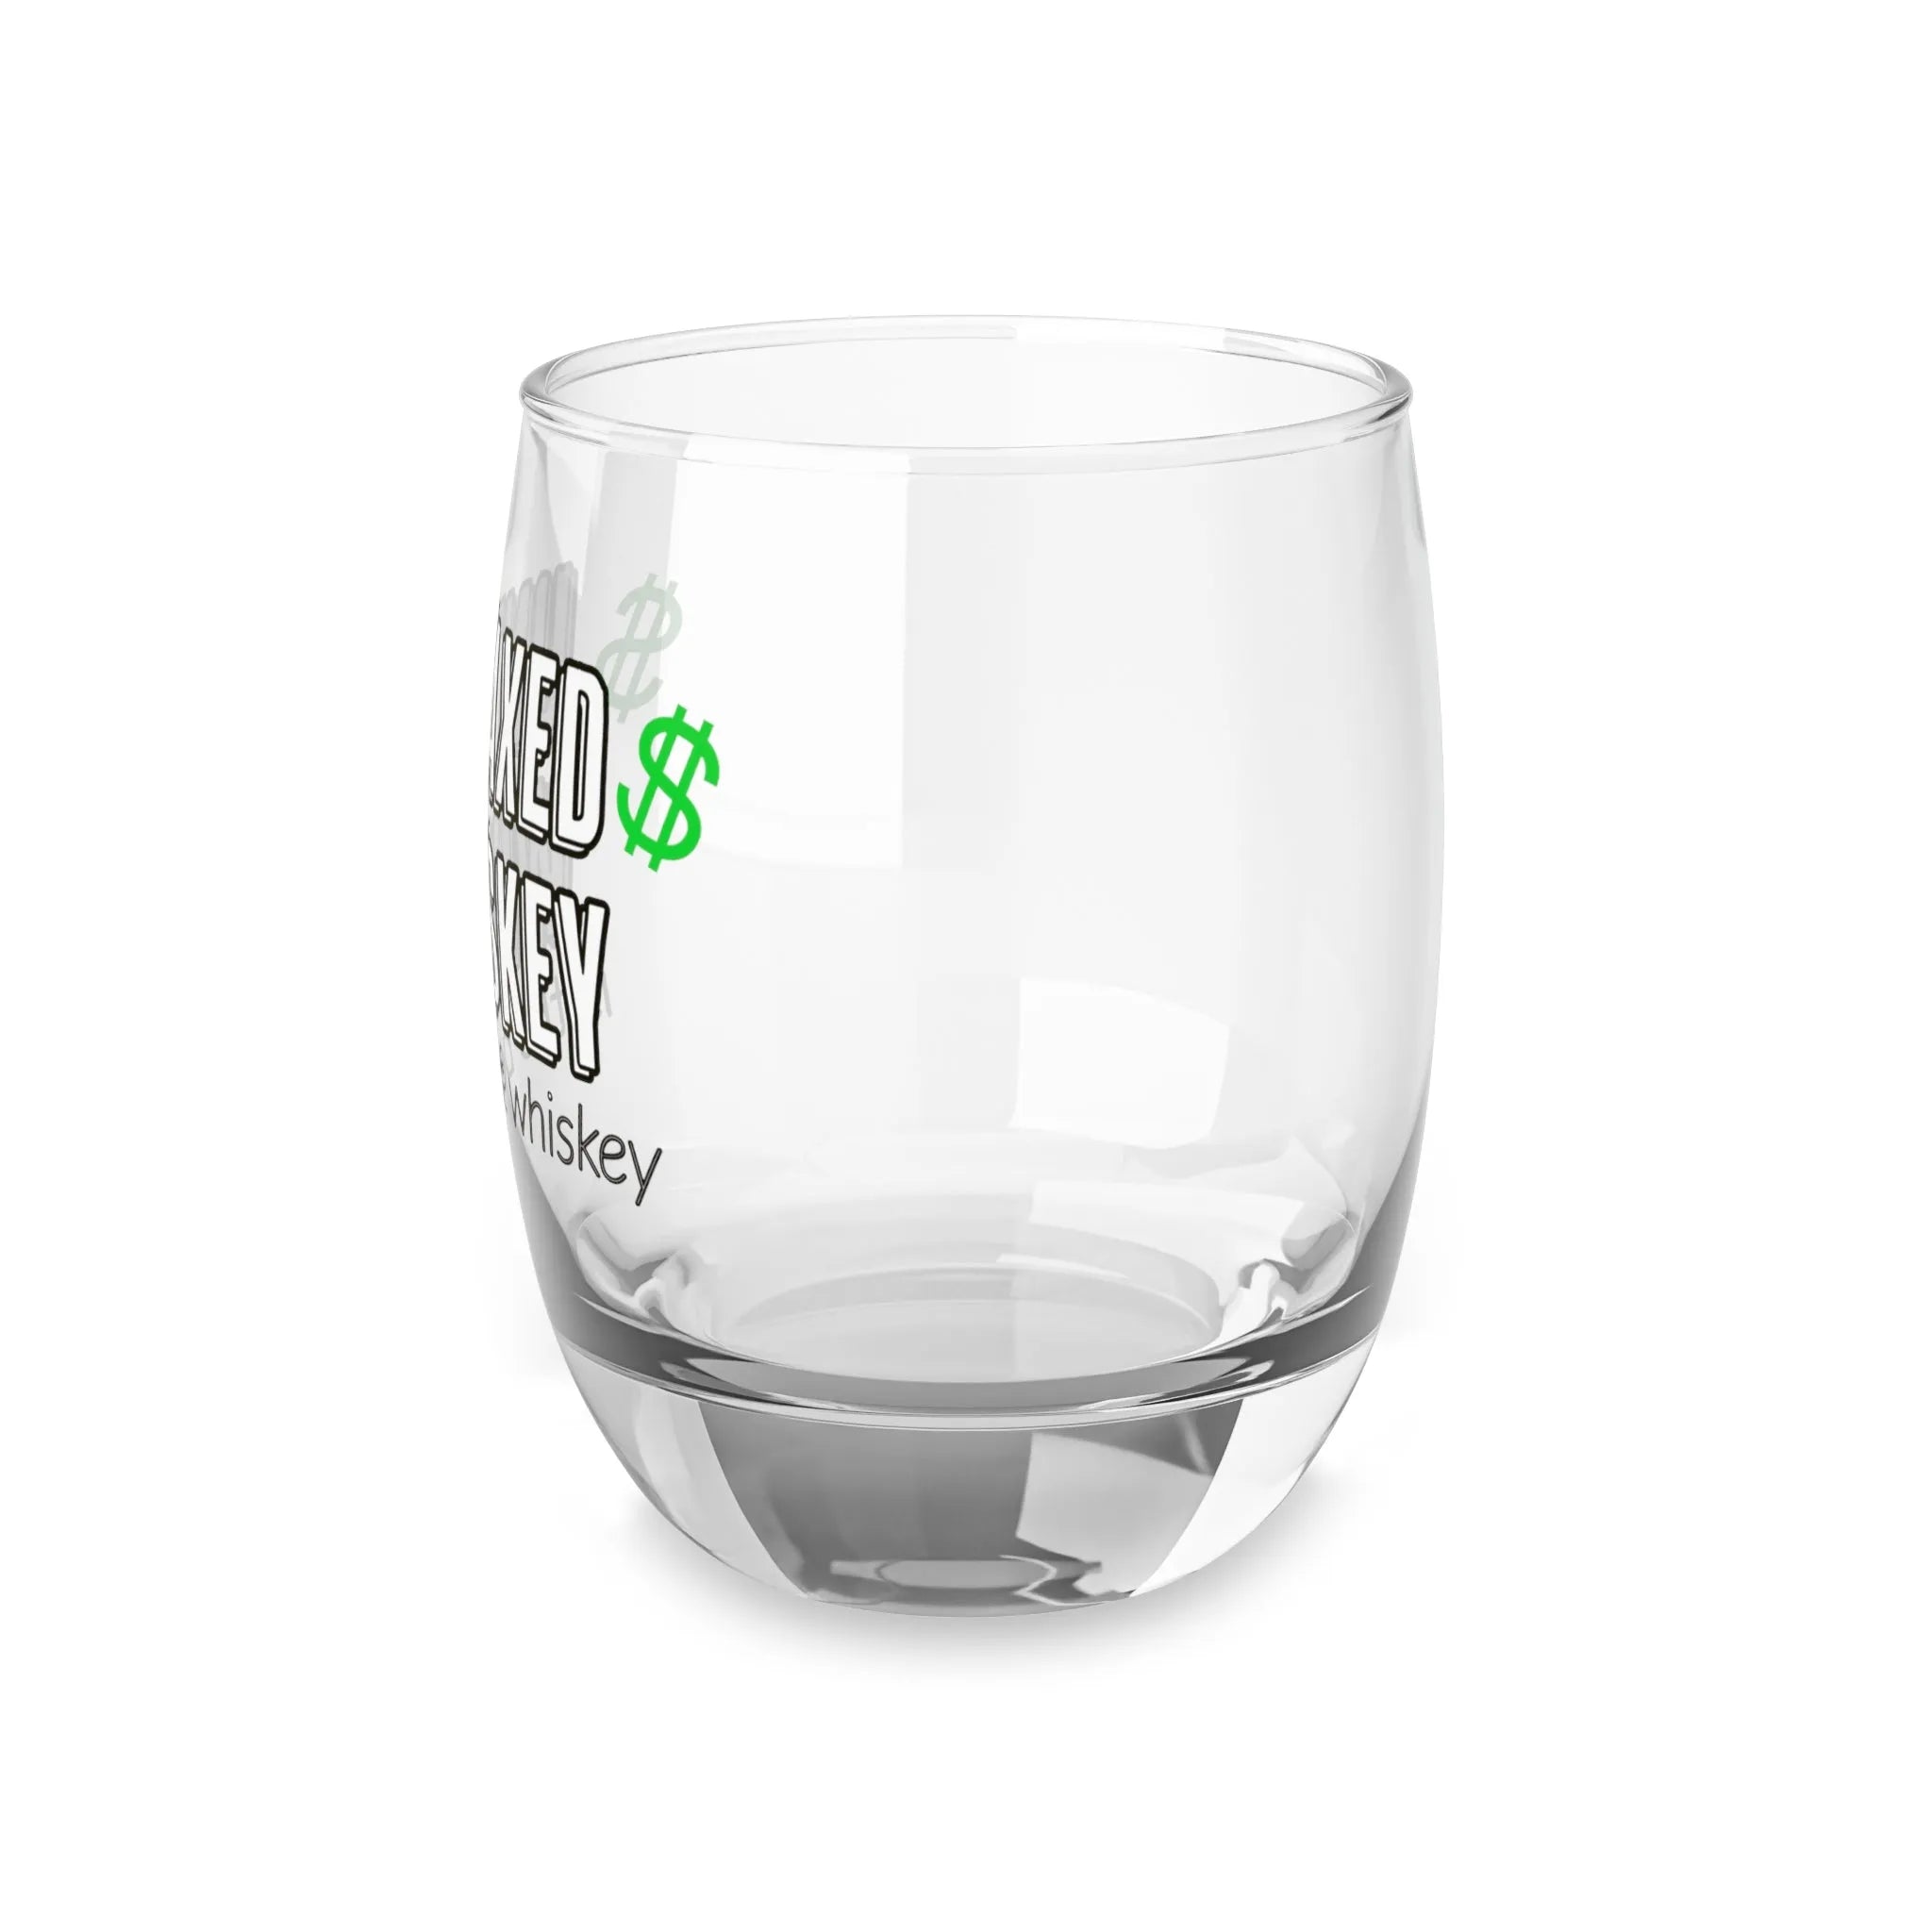 Untaxed Whiskey is the best whiskey Glass